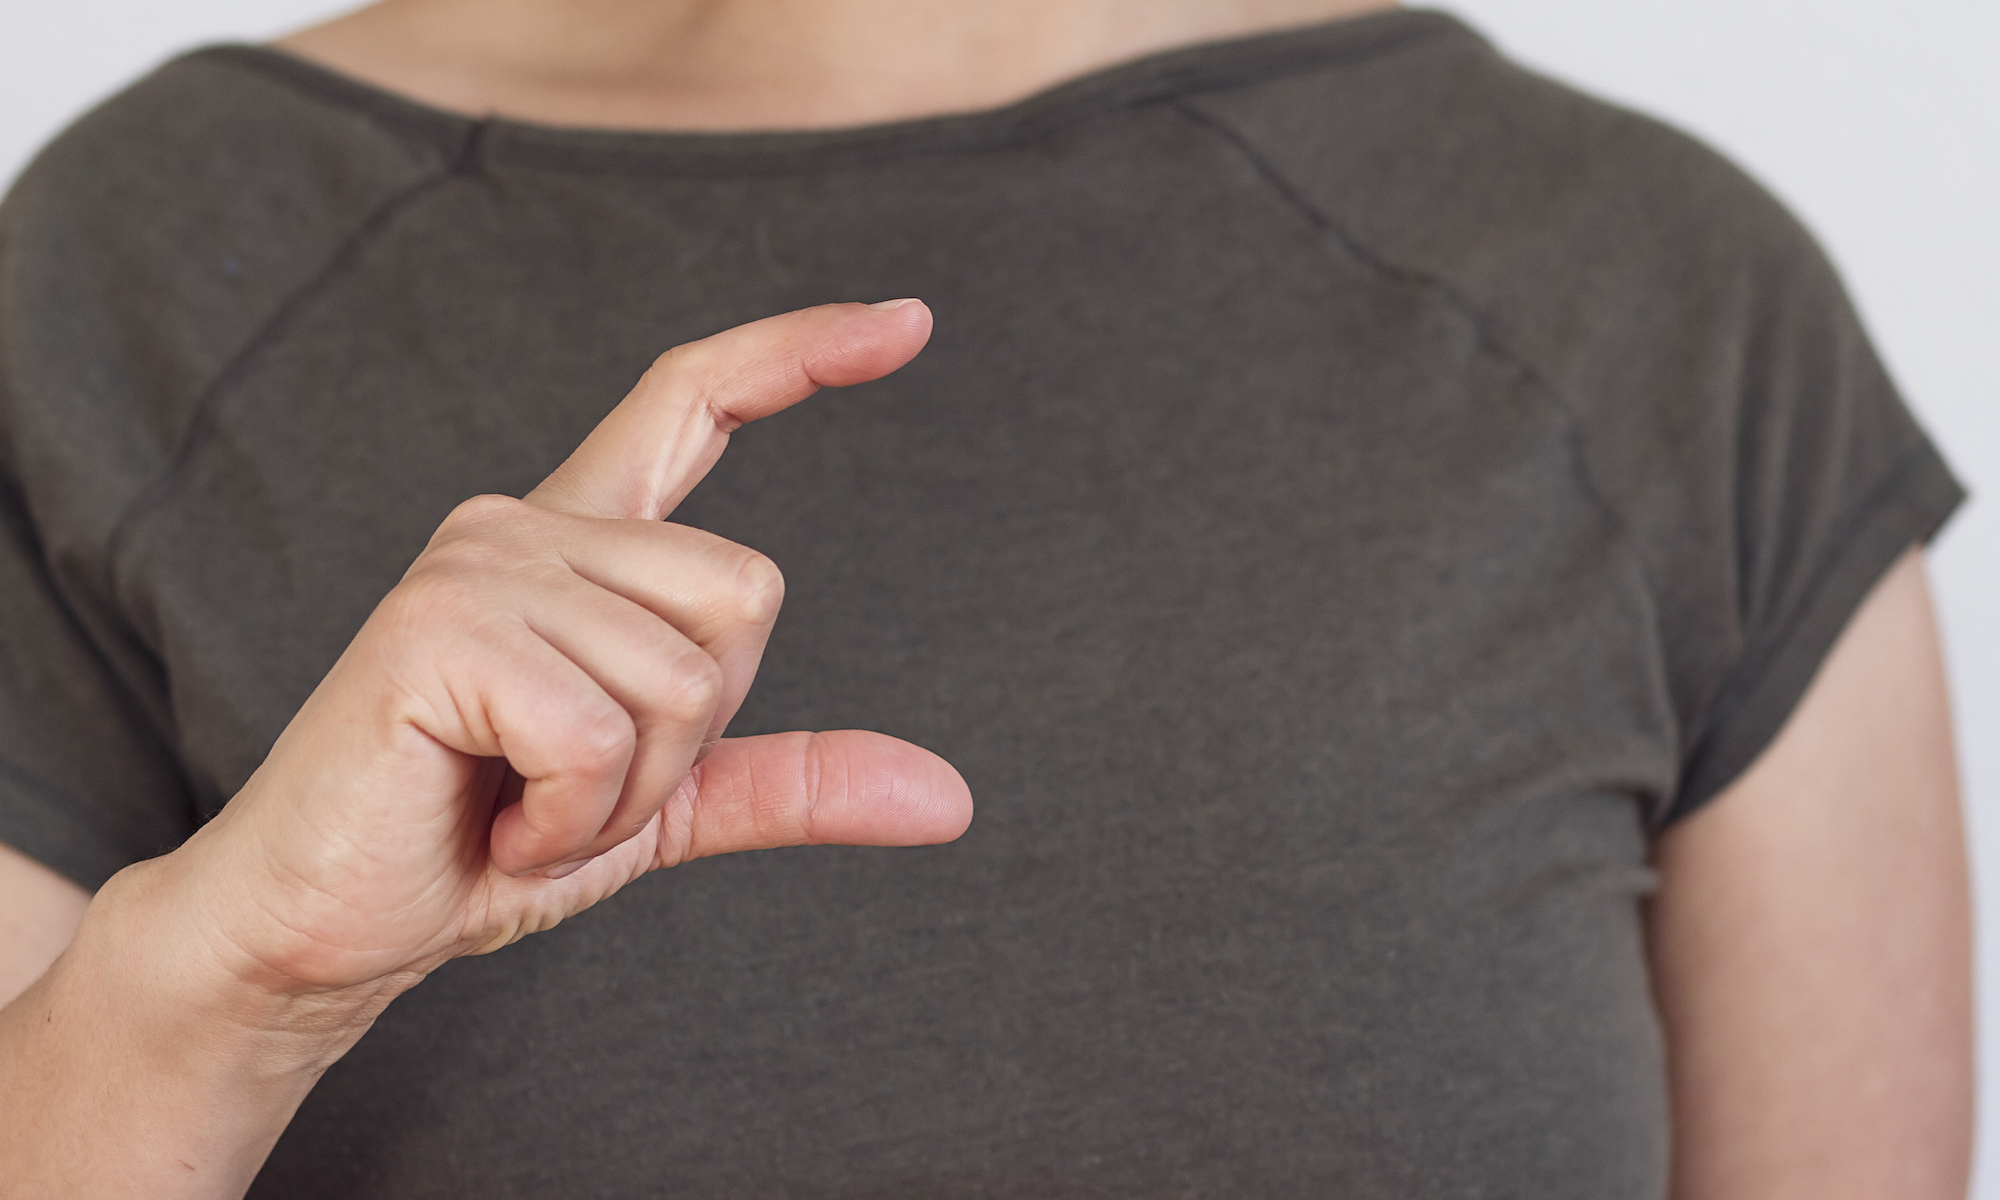 Woman's hand making gesture used in test for Parkinson's disease.